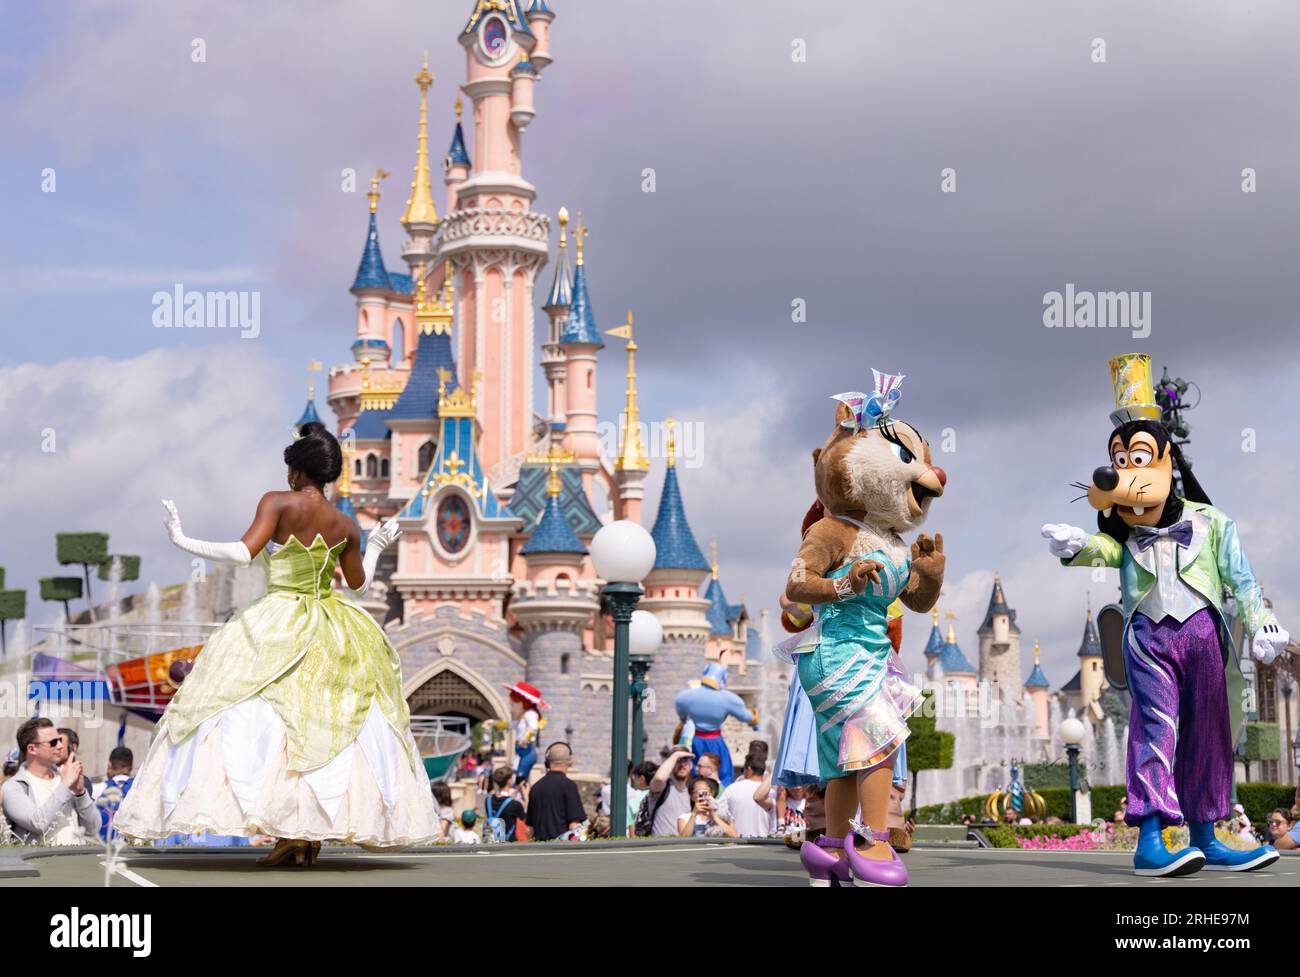 Disneyland Paris; Disney characters in front of the Disneyland Castle dancing during the Disneyland Parade;Princess Tiana, Clarice and Goofy; France Stock Photo